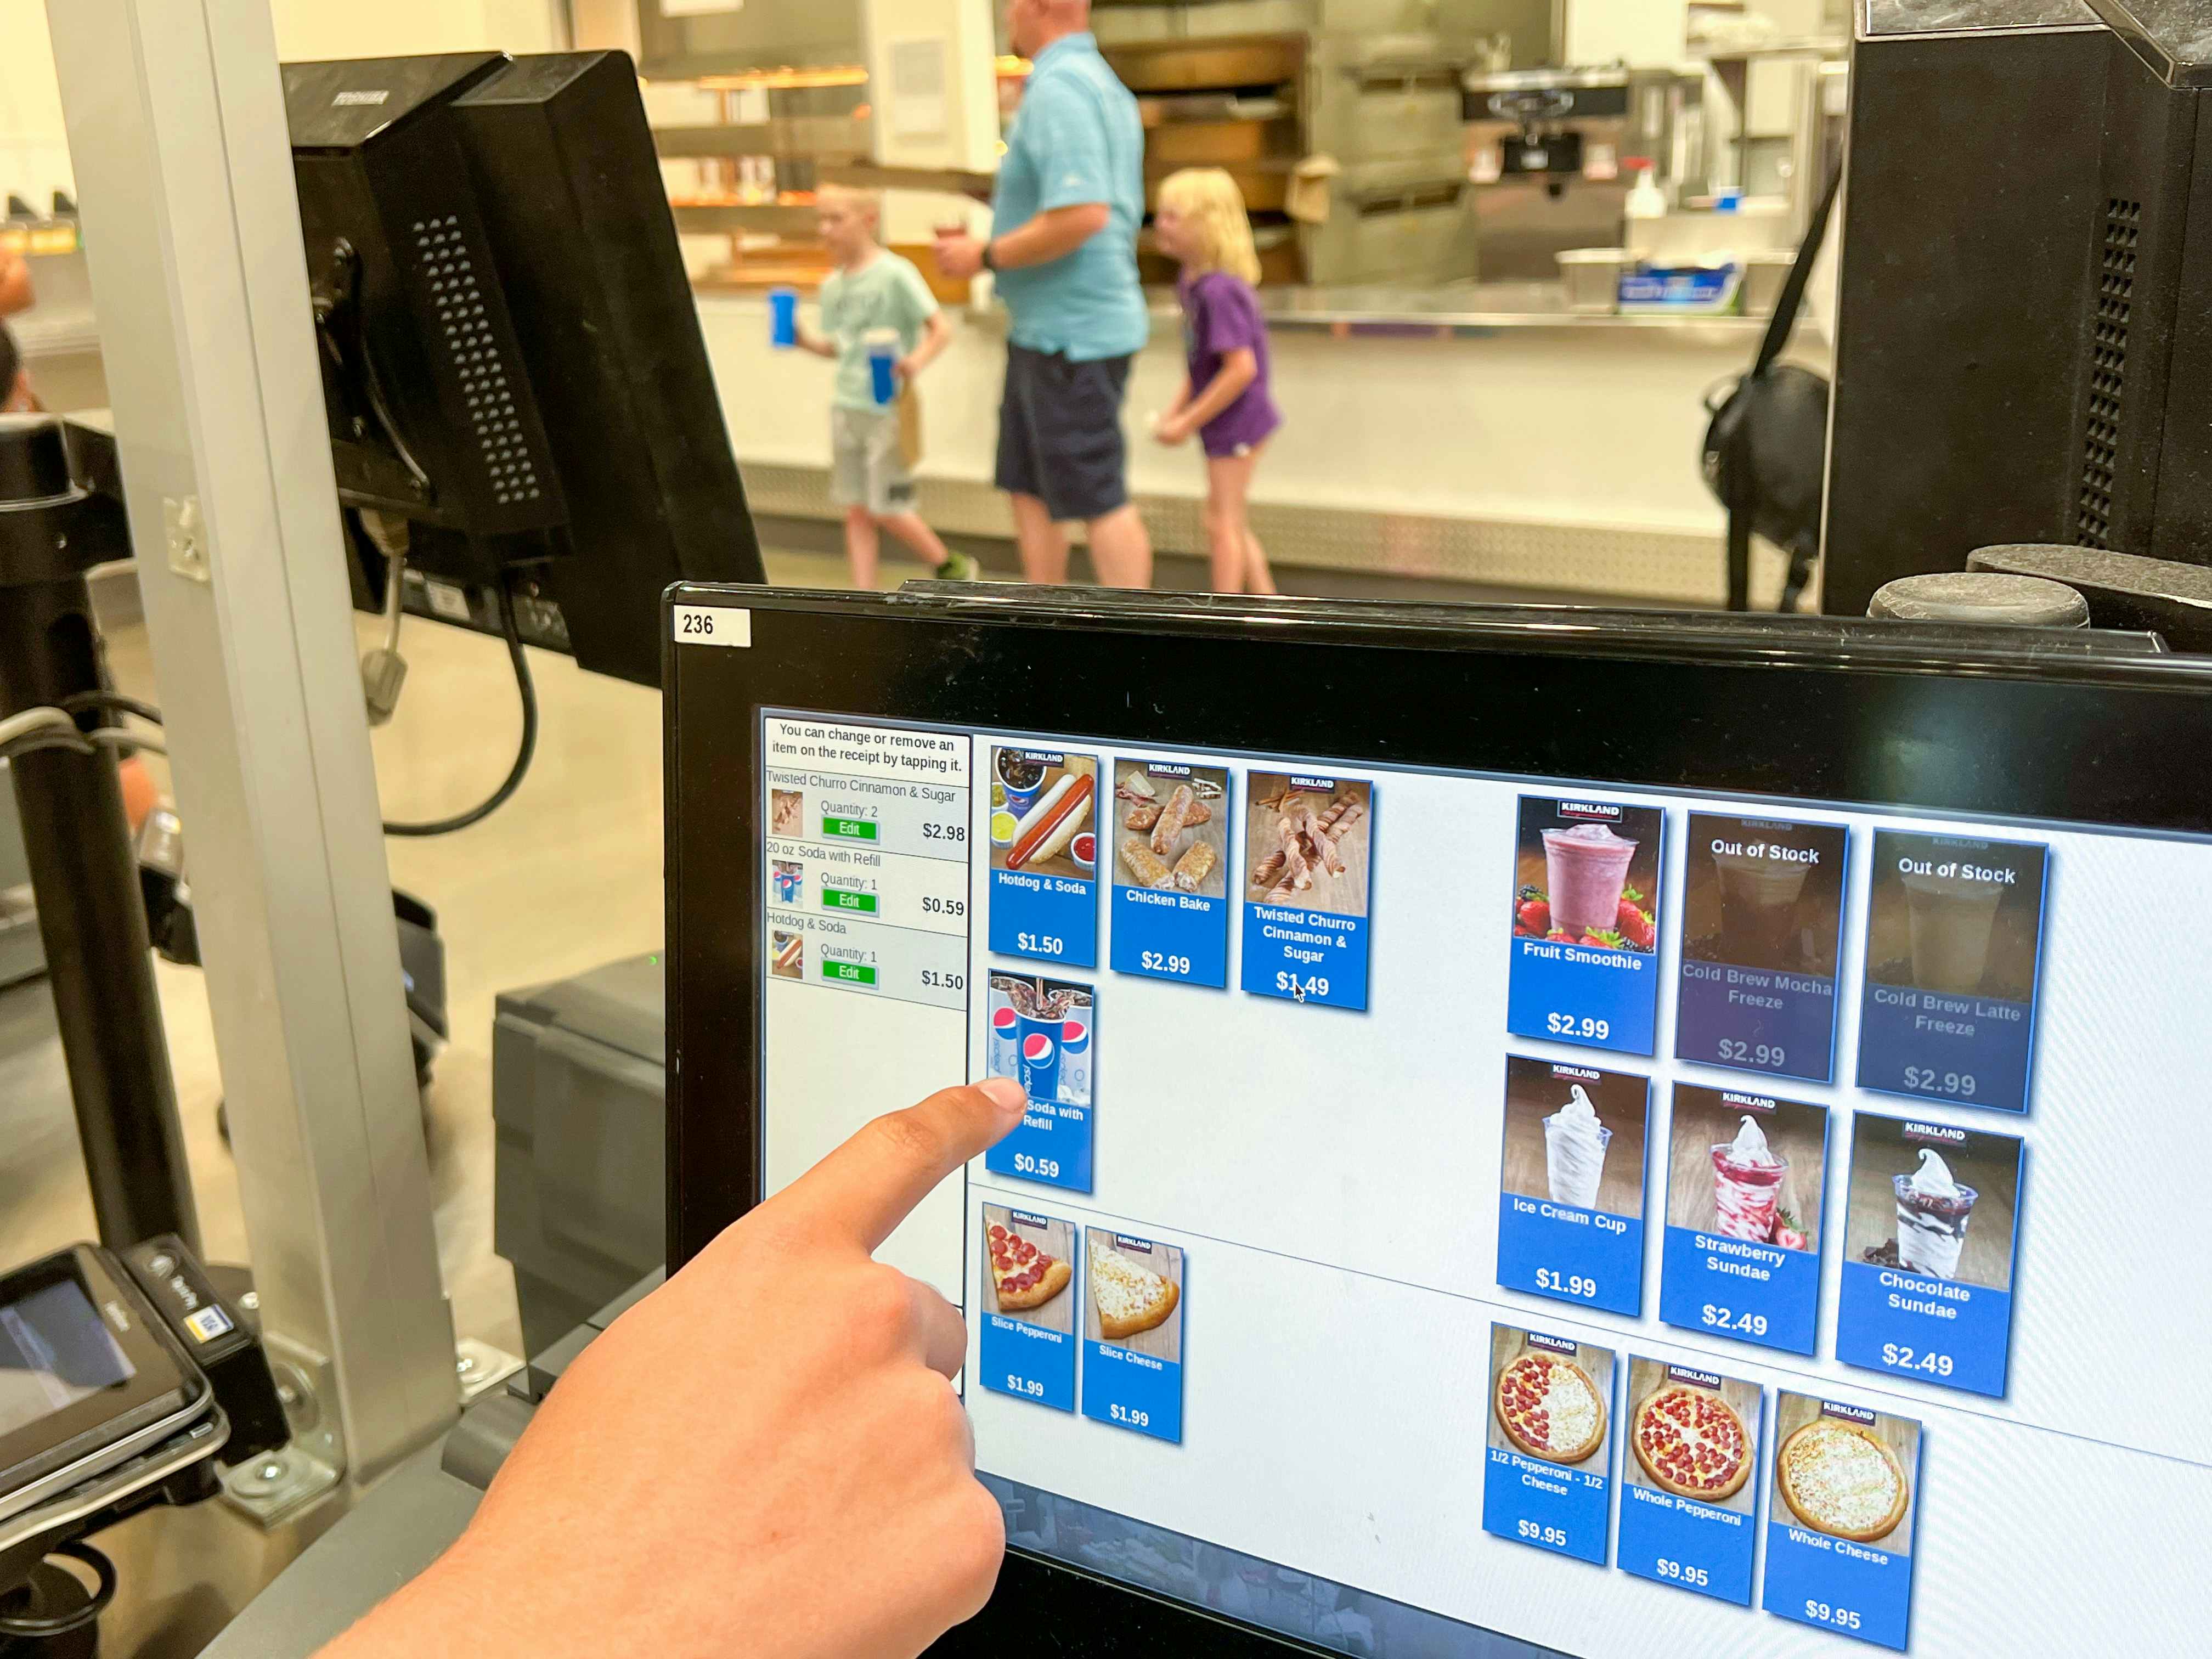 A person choosing items on the touchscreen at the Costco food court's self-serve kiosk.